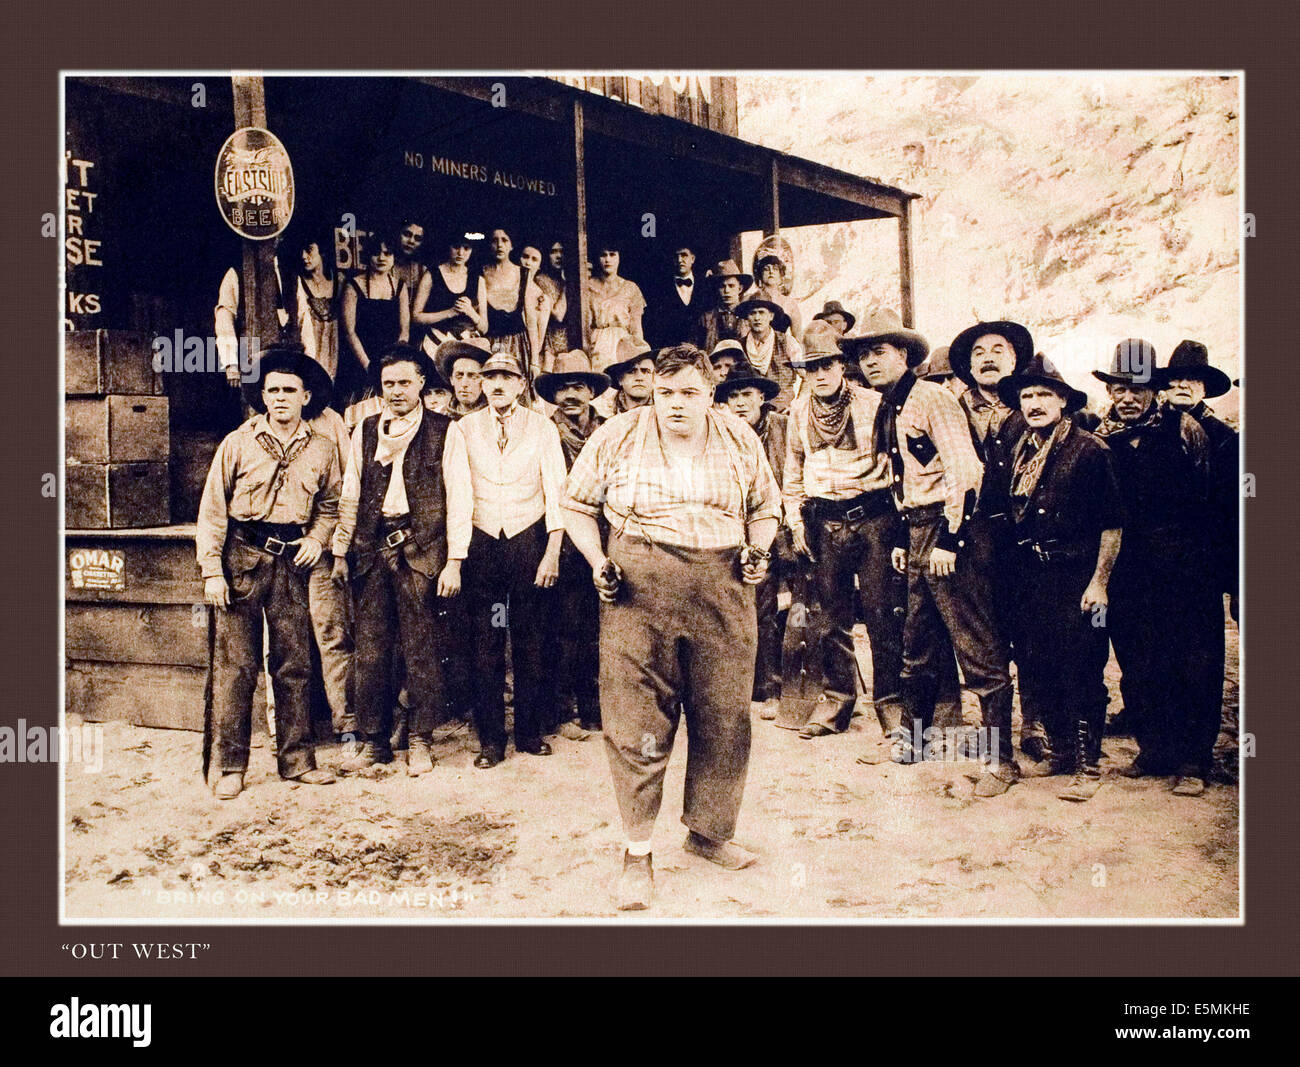 OUT WEST, Roscoe 'Fatty' Arbuckle, 1918. Stock Photo